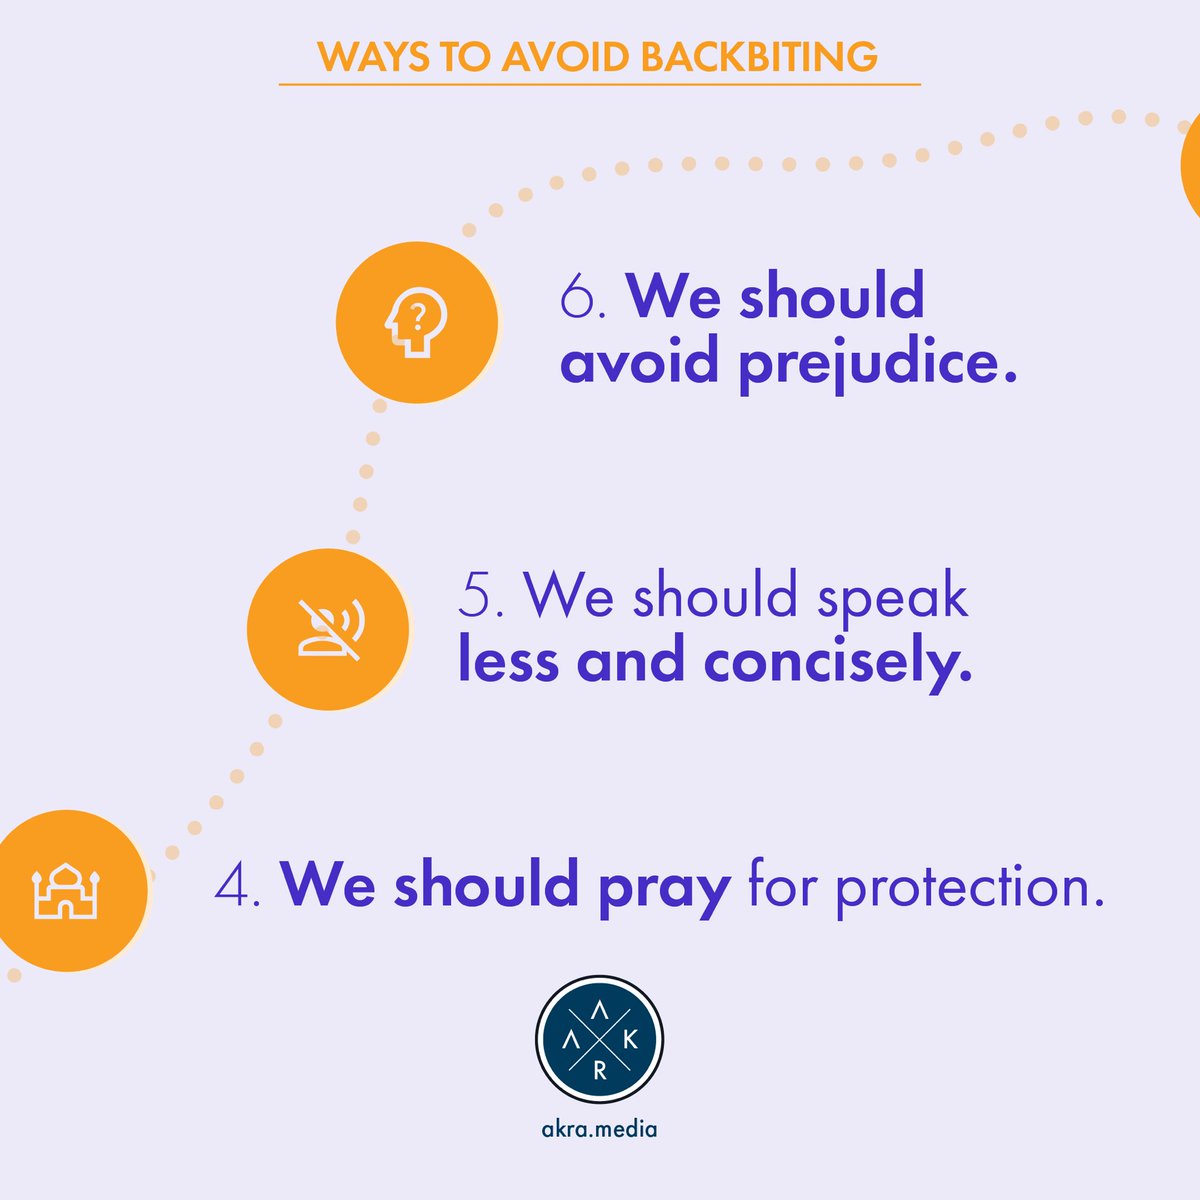 🔹We should pray for protection.
🔹We should speak less and concisely.
🔹We should avoid prejudice.